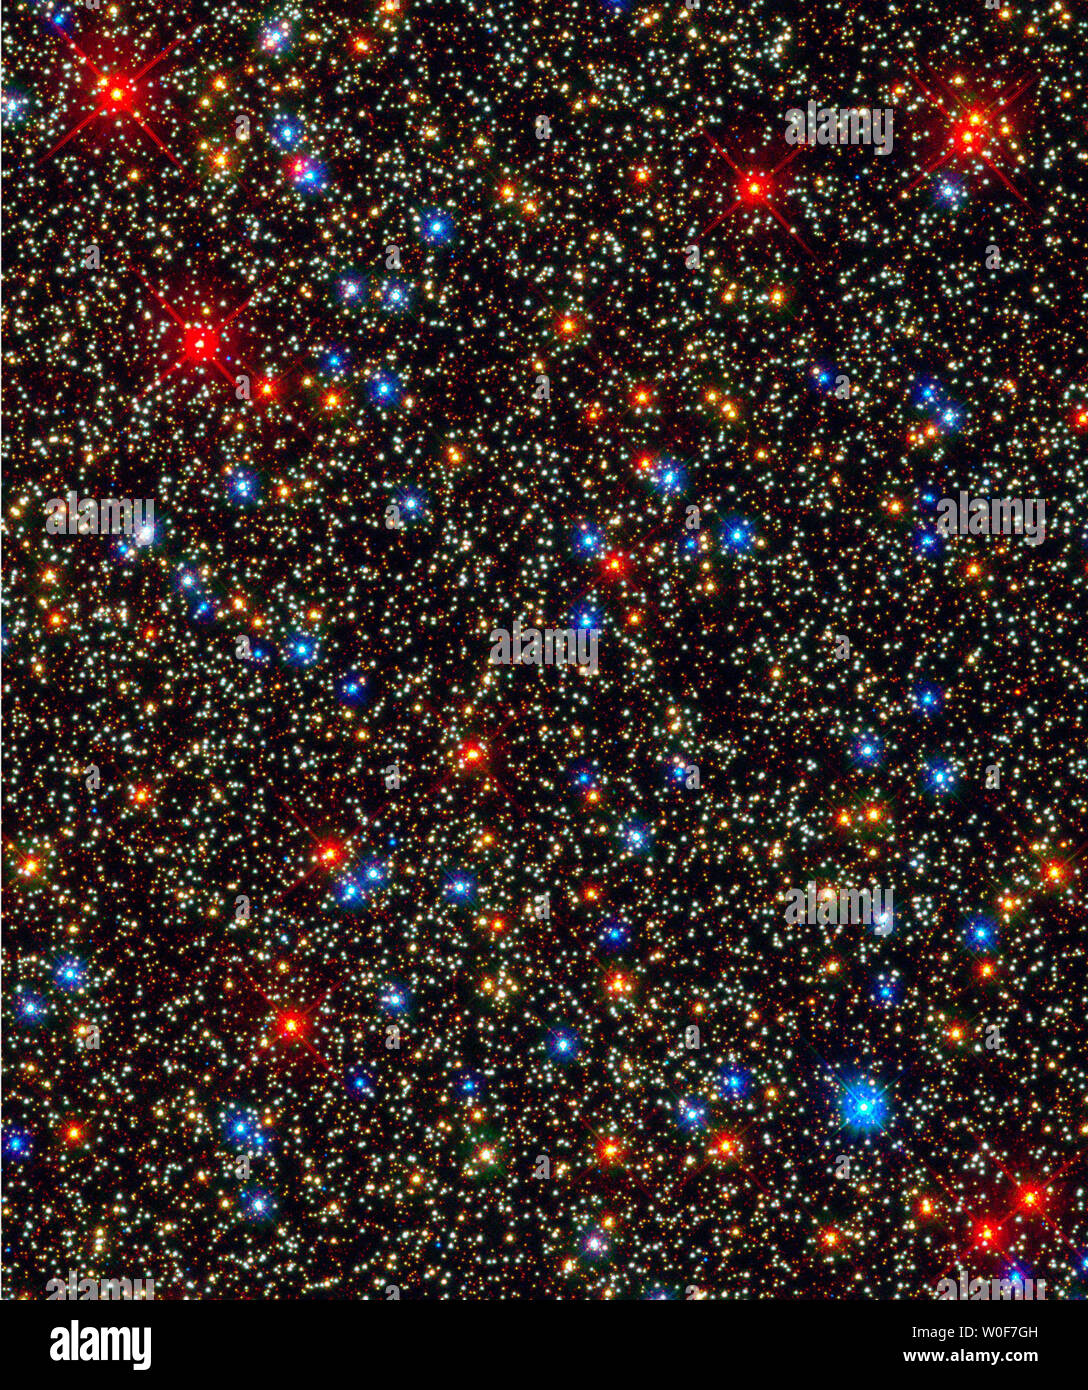 This image released by NASA in Washington on September 9, 2009 shows Globular Star Cluster Omega Centauri. NASA's Hubble Space Telescope snapped this panoramic view of a colorful assortment of 100,000 stars residing in the crowded core of a giant star cluster. This is one of the first images taken by the new Wide Field Camera 3 (WFC3), installed aboard Hubble in May 2009, during Servicing Mission 4.   UPI/NASA, ESA, Hubble SM4 ERO Team Stock Photo